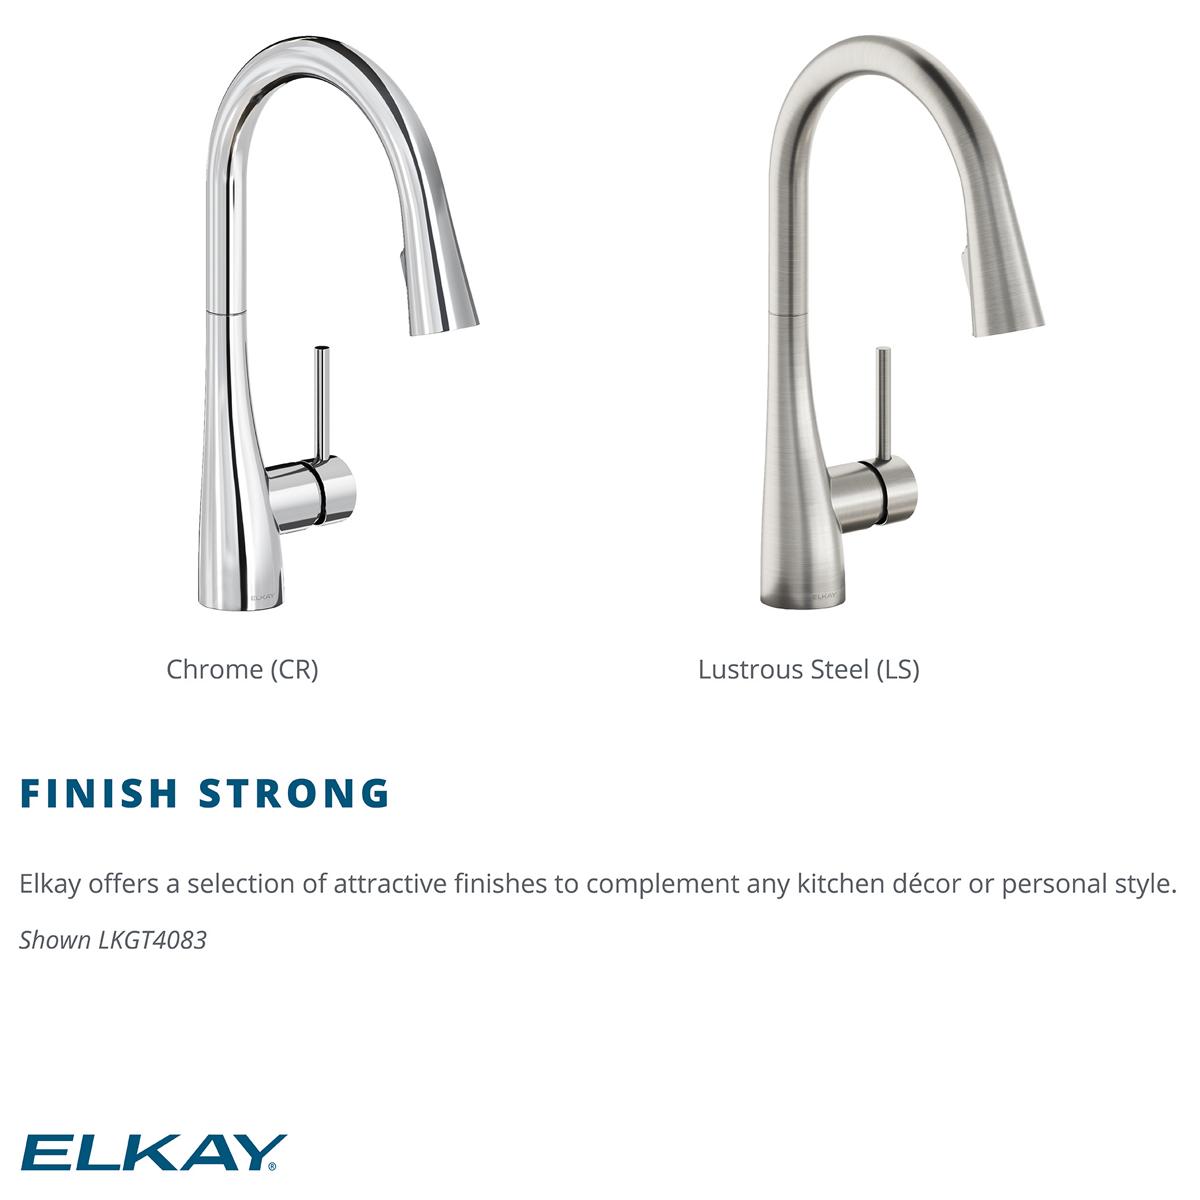 Elkay Gourmet Single Hole Kitchen Faucet with Pull-down Spray and Forward Only Lever Handle